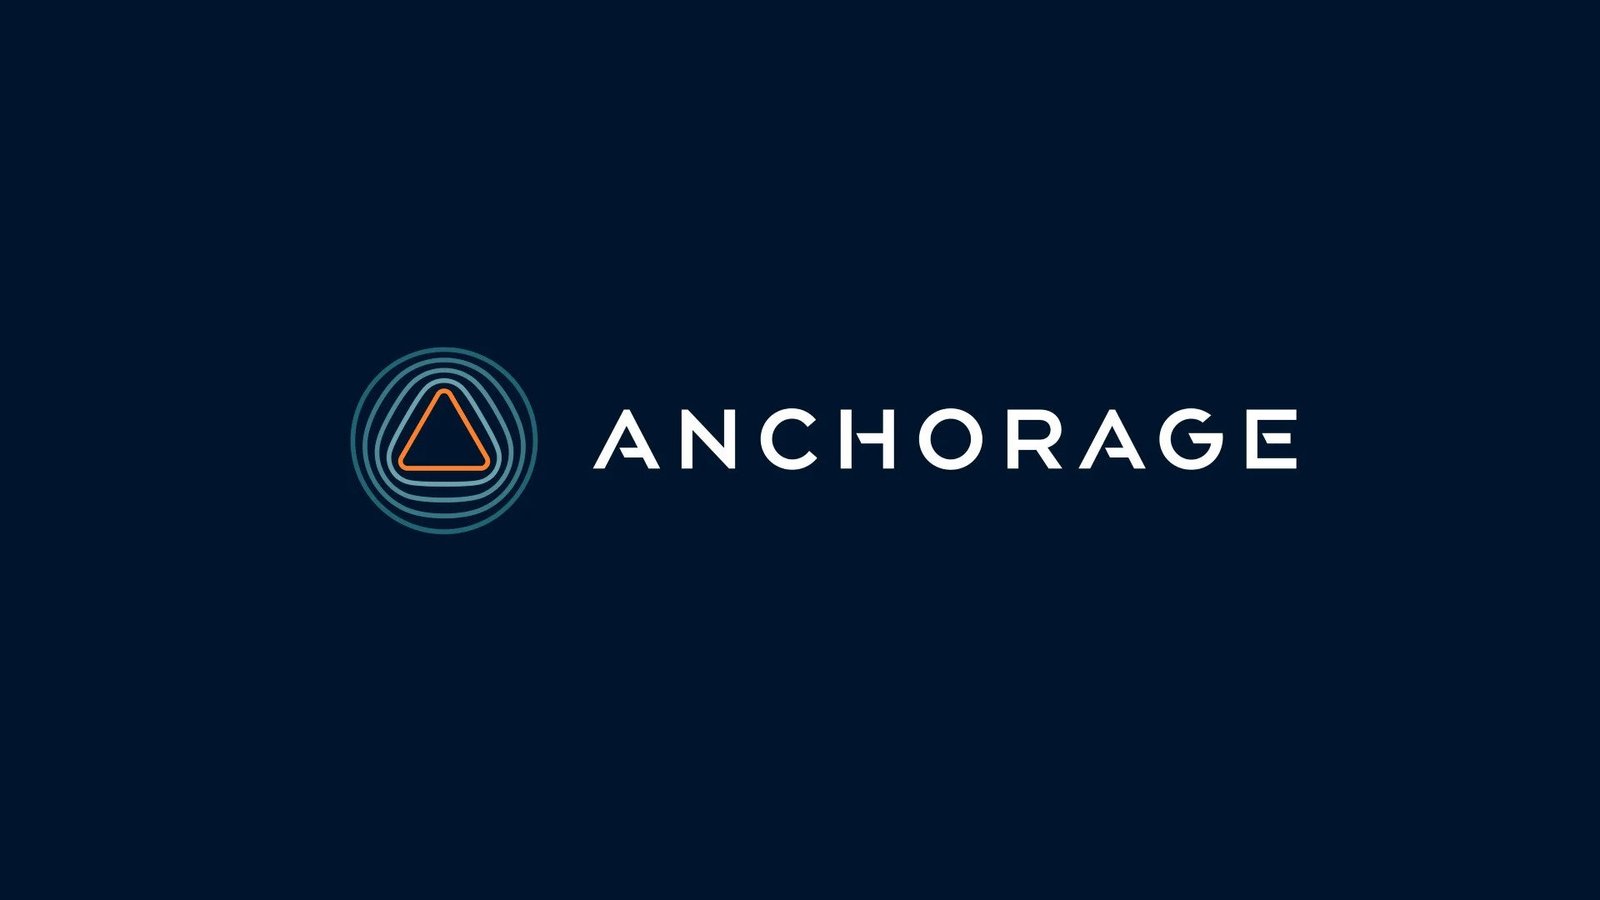 Anchorage Co-Founder Says Bank Charter Is Significant to Endure Crypto Winter